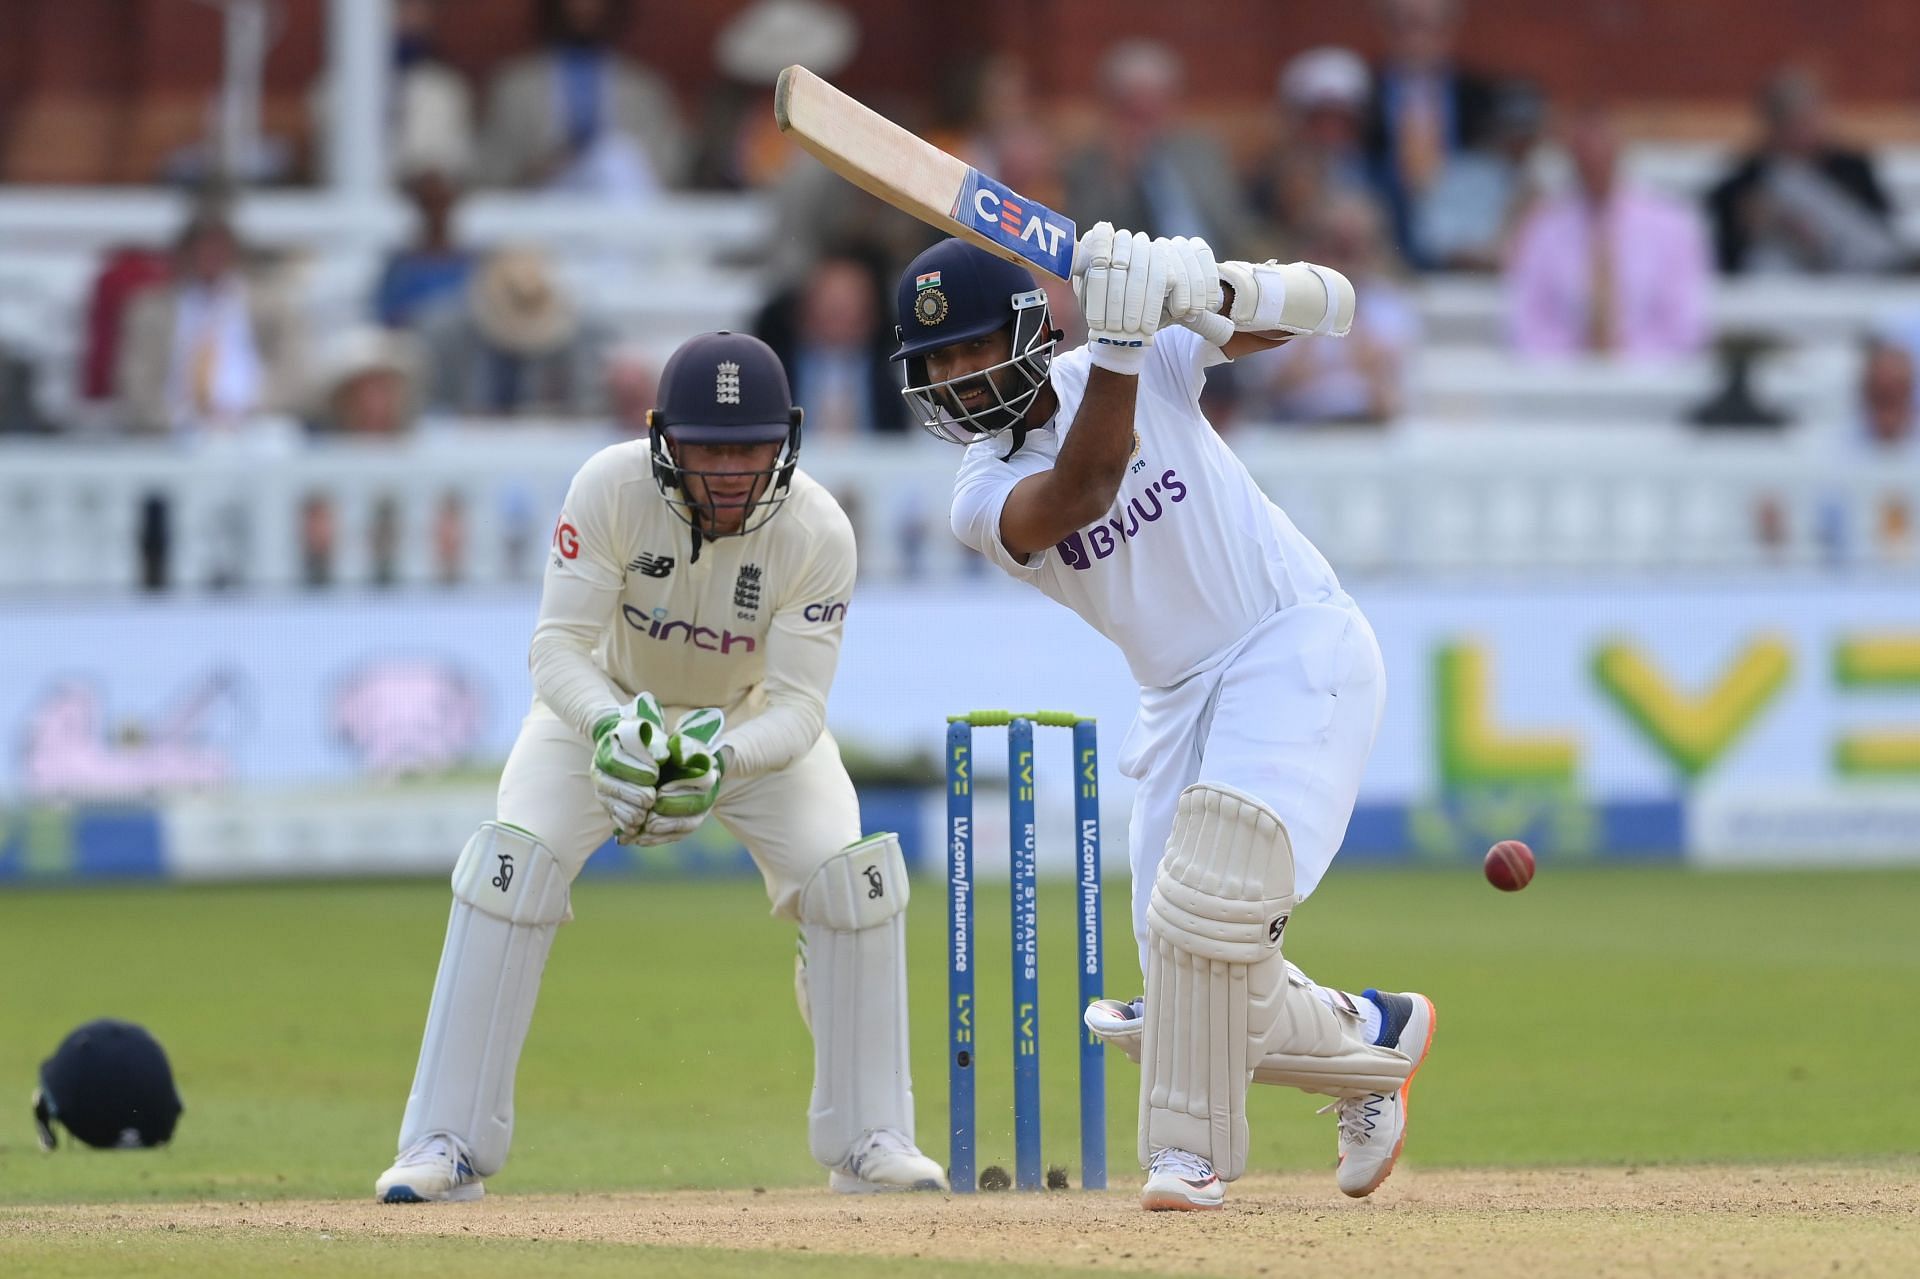 Indian vice-captain Ajinkya Rahane&#039;s Test average has gone down below 40 for the first time. (Credit: Getty Images)